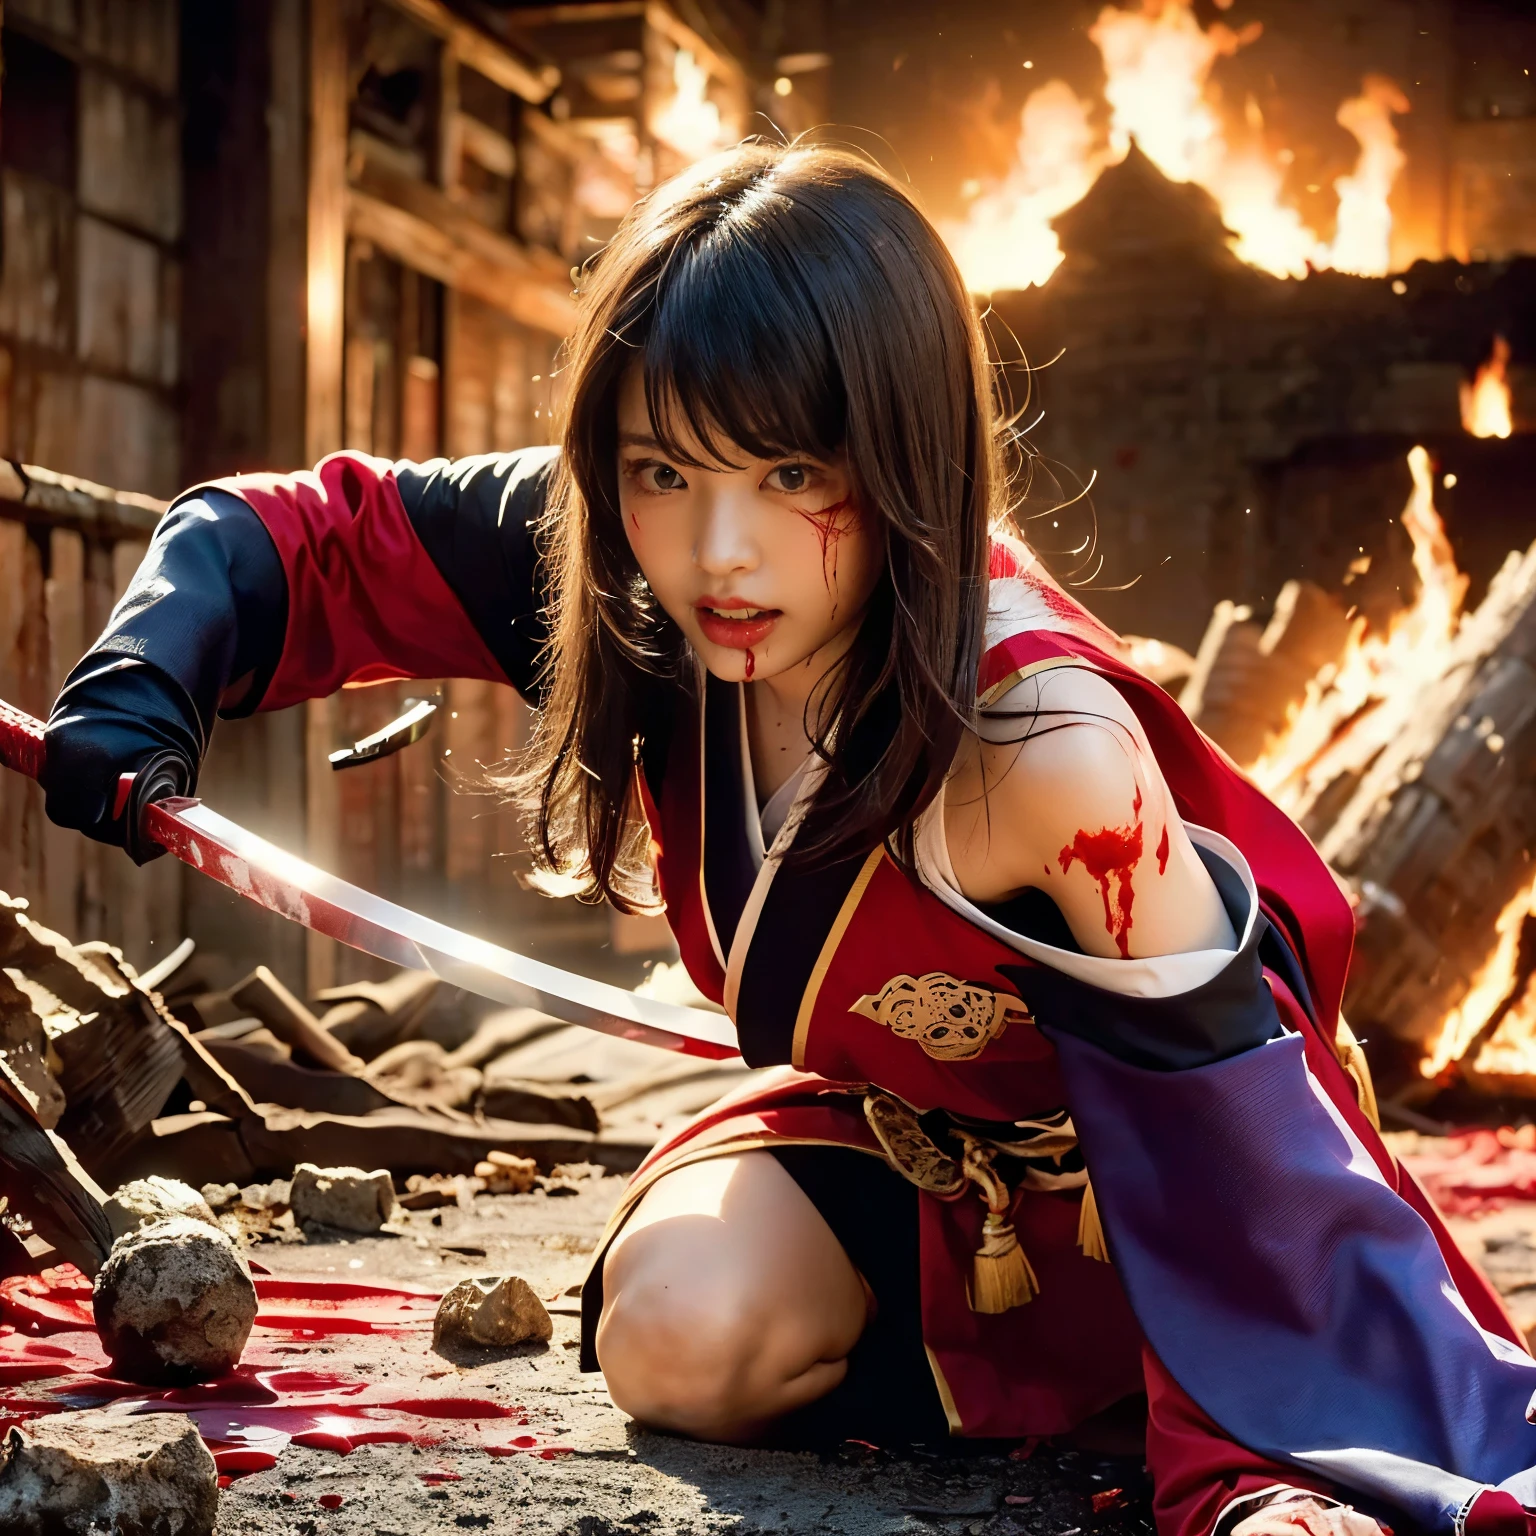 (((Realistic, masterpiece, best quality, crisp detail, high definition, high detail, rich detail, sharp focus, colorful, perfect studio lightning))), 20 years old assassin,((( in the middle of a war, kasumi arimura, severely wounded, slashed, attack stance, swinging katana))), wearing (((fully decorated golden armor, armored kimono, blood scattered face, blood tears, blood bath, blood shed))), (((fire everywhere, blood everywhere, death everywhere, japan bakumatsu period, dead bodies,carcass,burned japanese castle,hellish,chaos)) traditional village background)